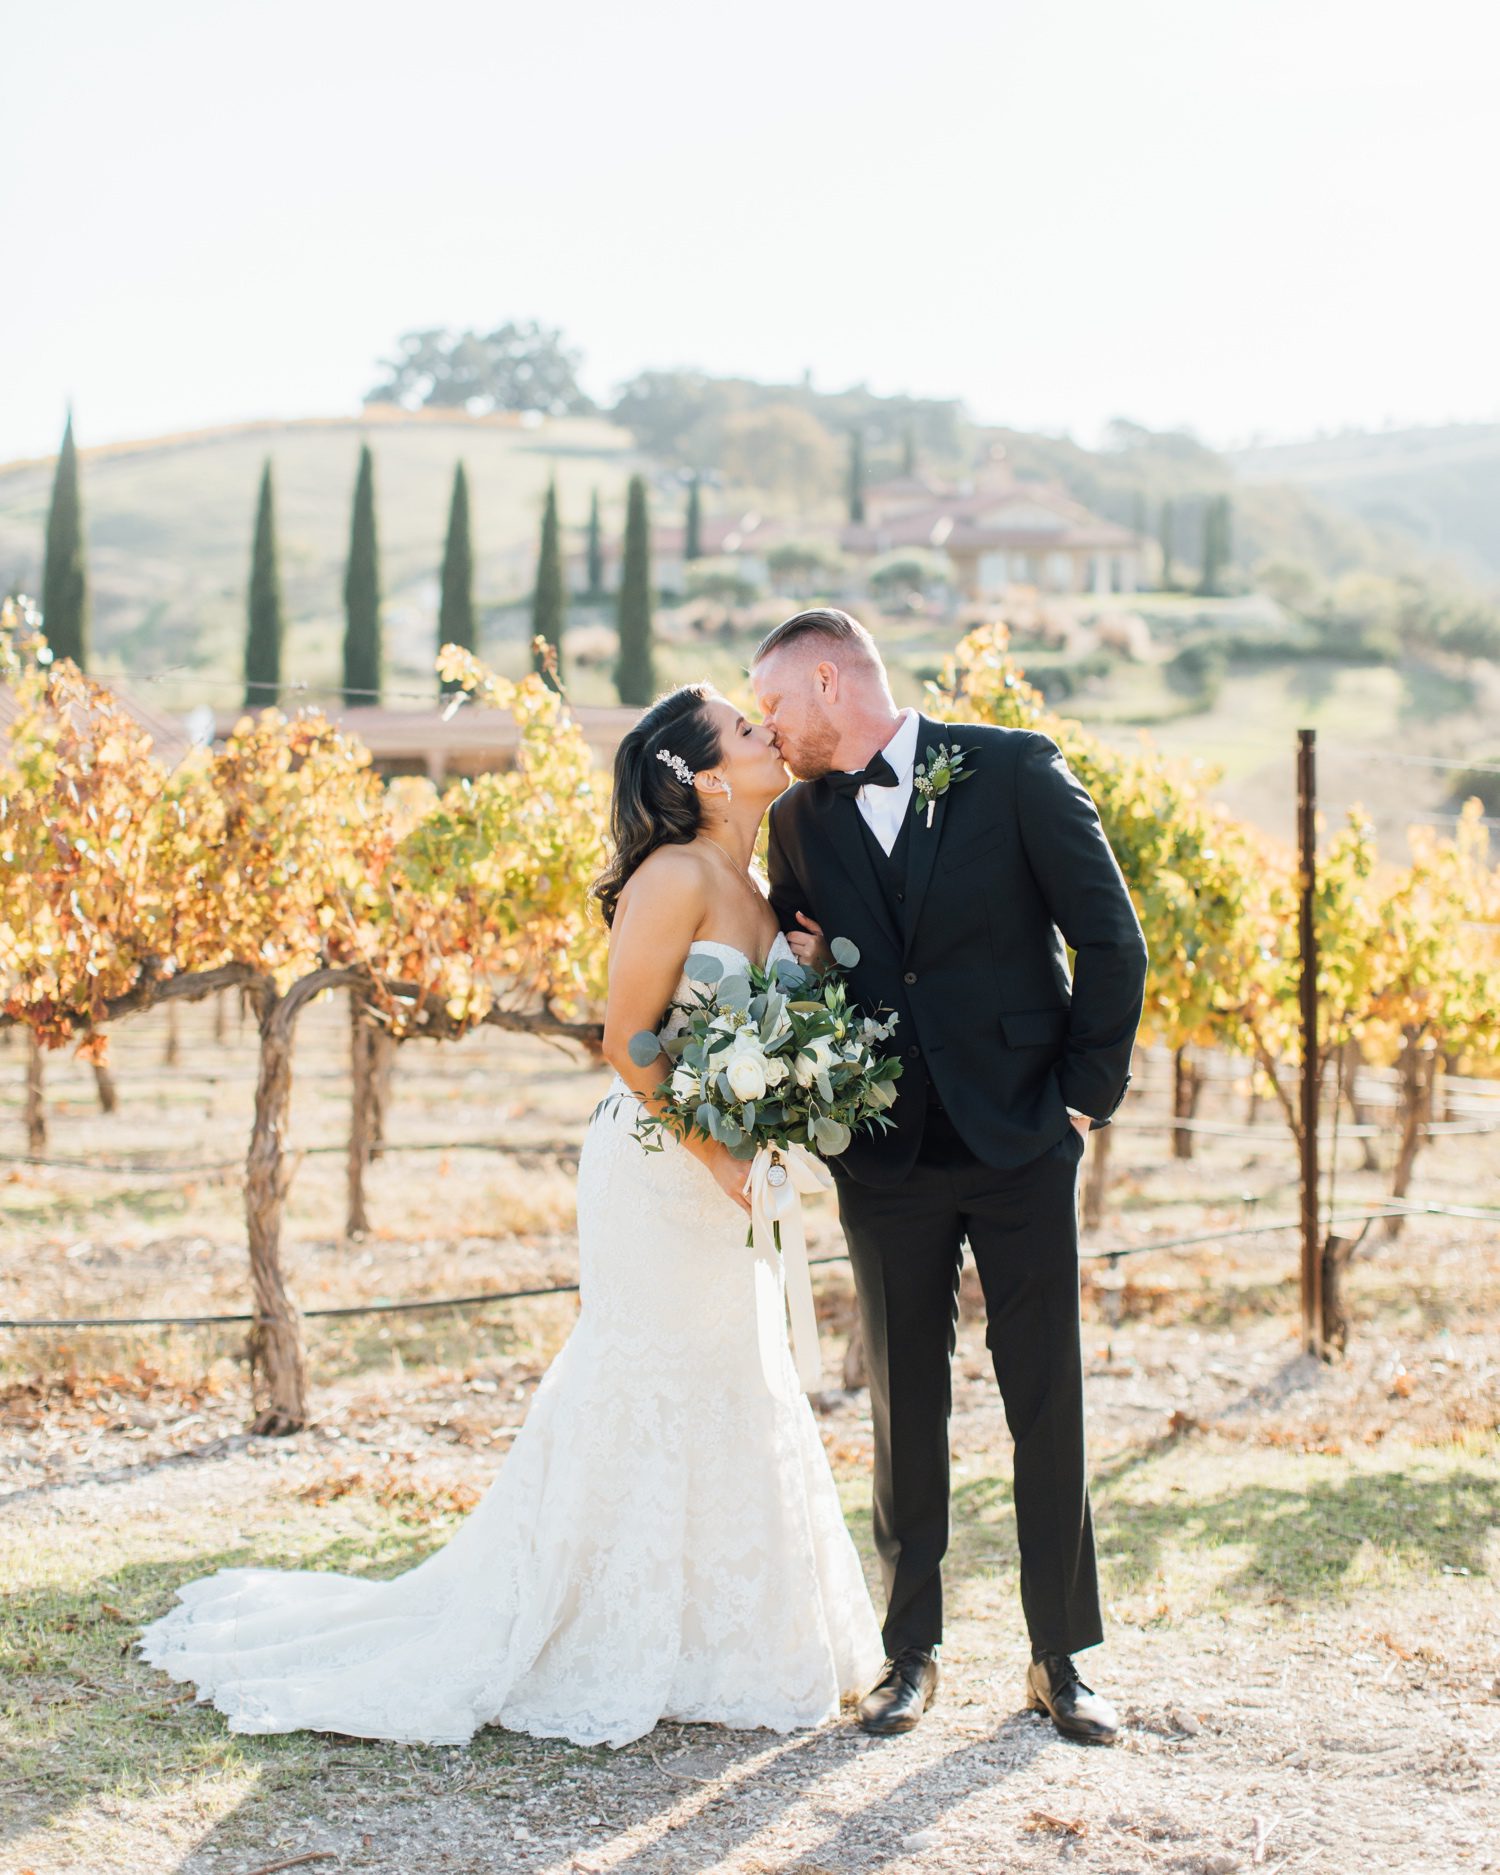 Tuscany inspired wedding at Aterno Estate in Paso Robles California by wine country photographer Jessica Sofranko